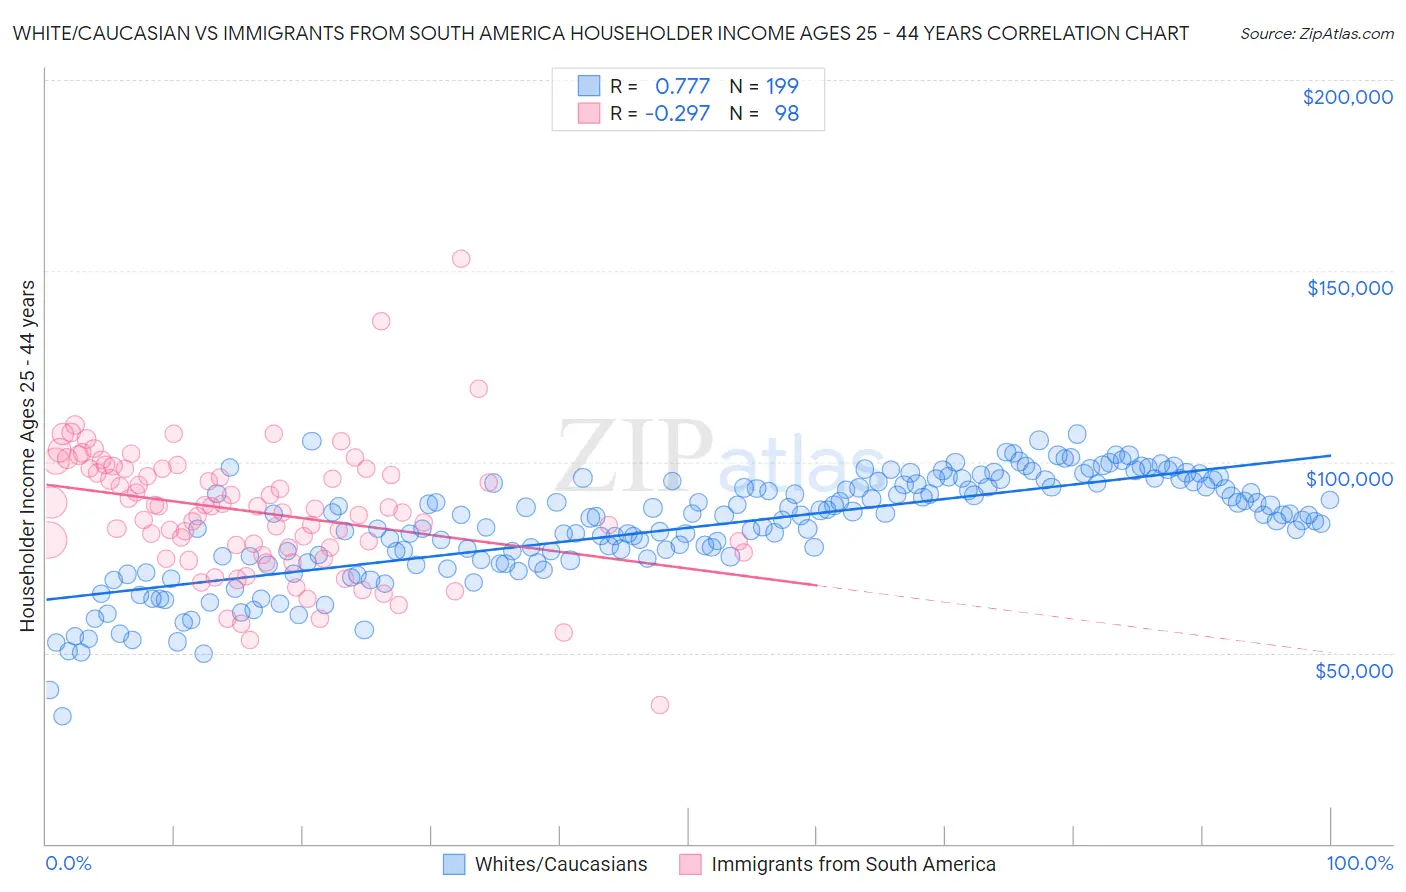 White/Caucasian vs Immigrants from South America Householder Income Ages 25 - 44 years